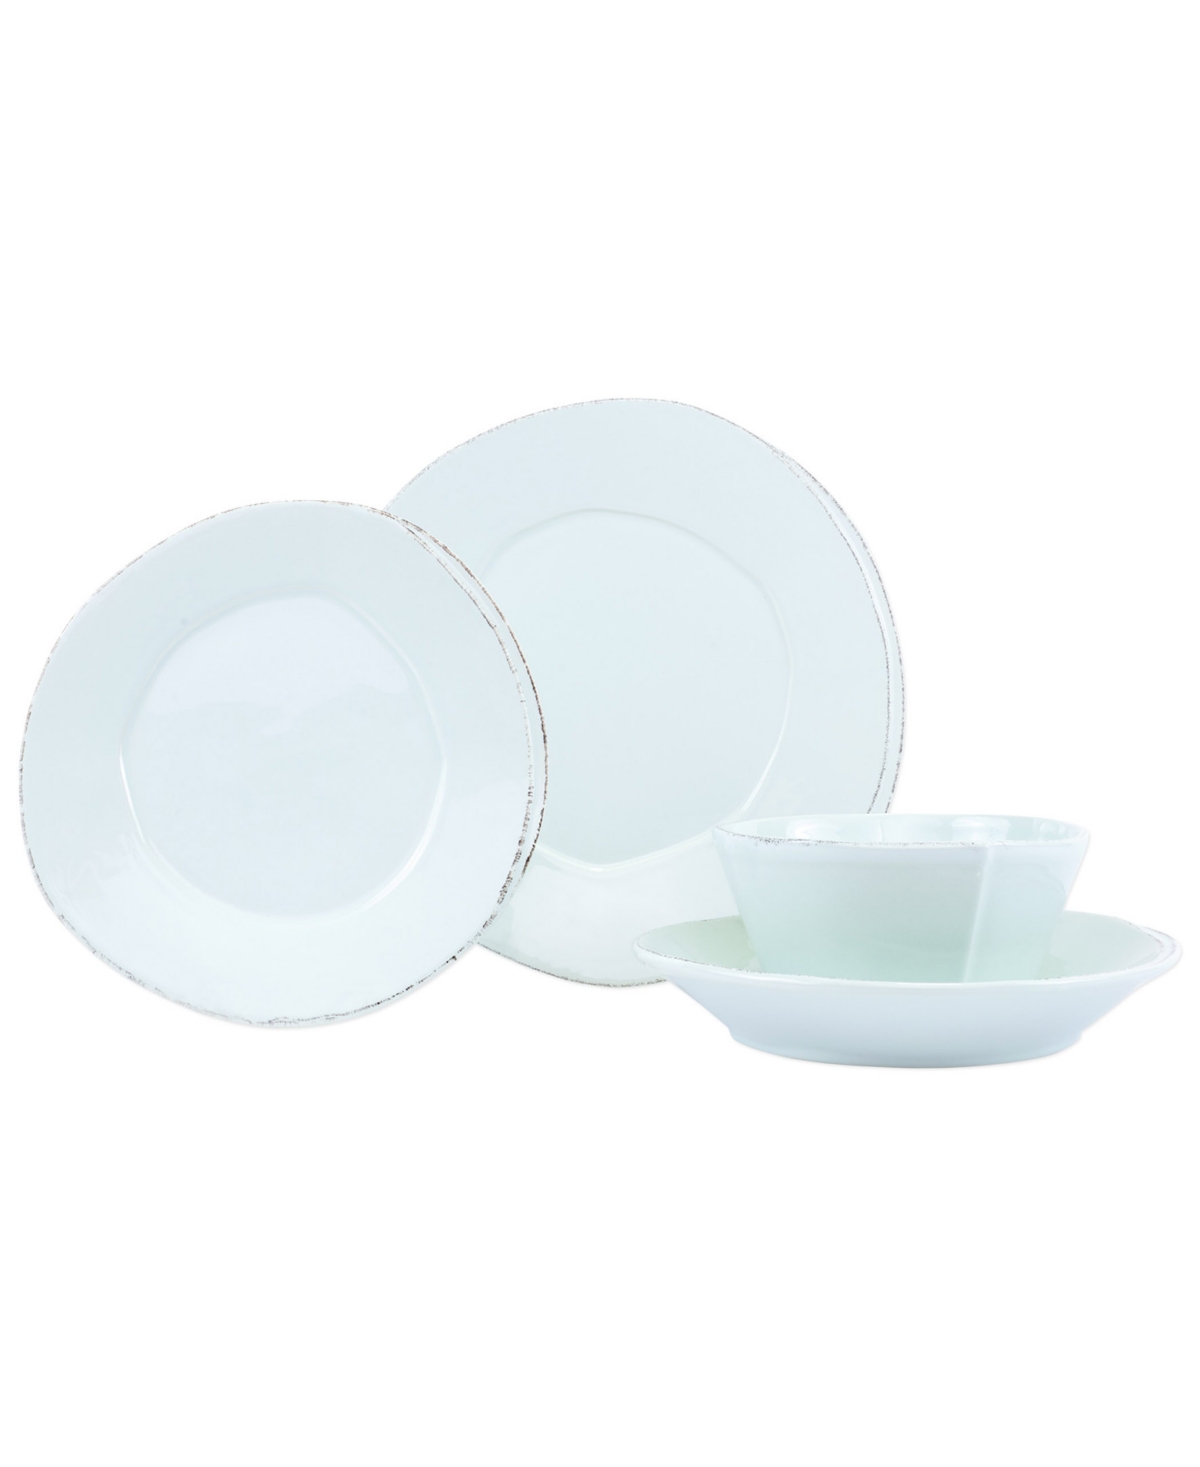 Lastra 4 Piece Place Setting - Linen